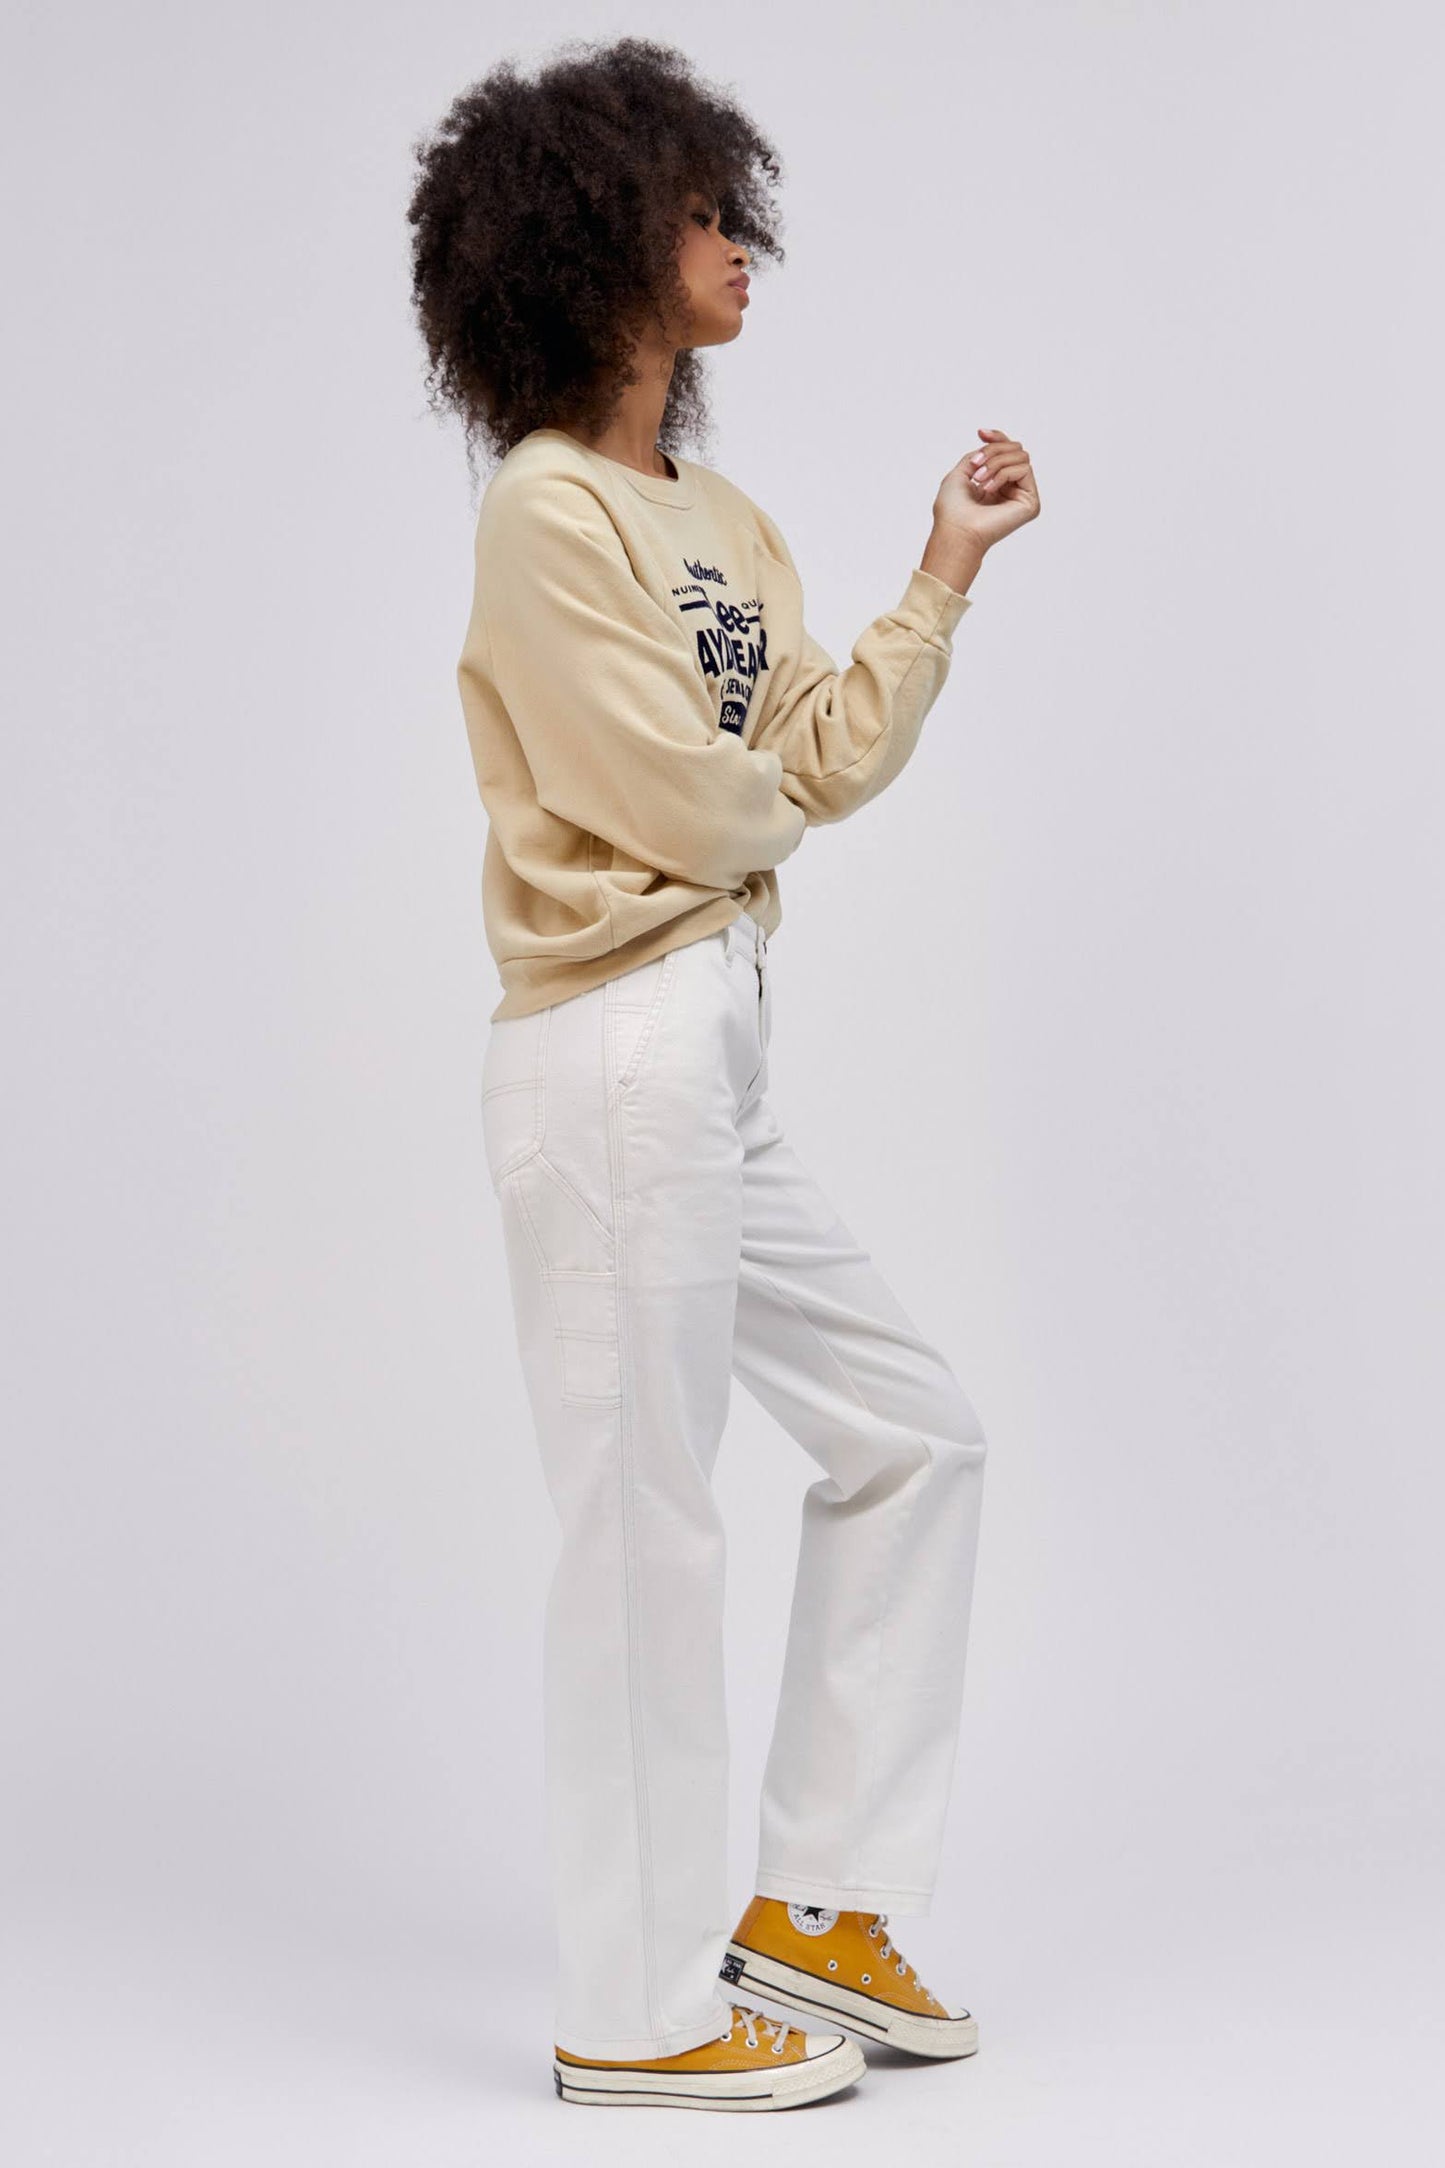 curly haired model posing to the side with hand up and wearing a khaki sweatshirt and white workwear pants